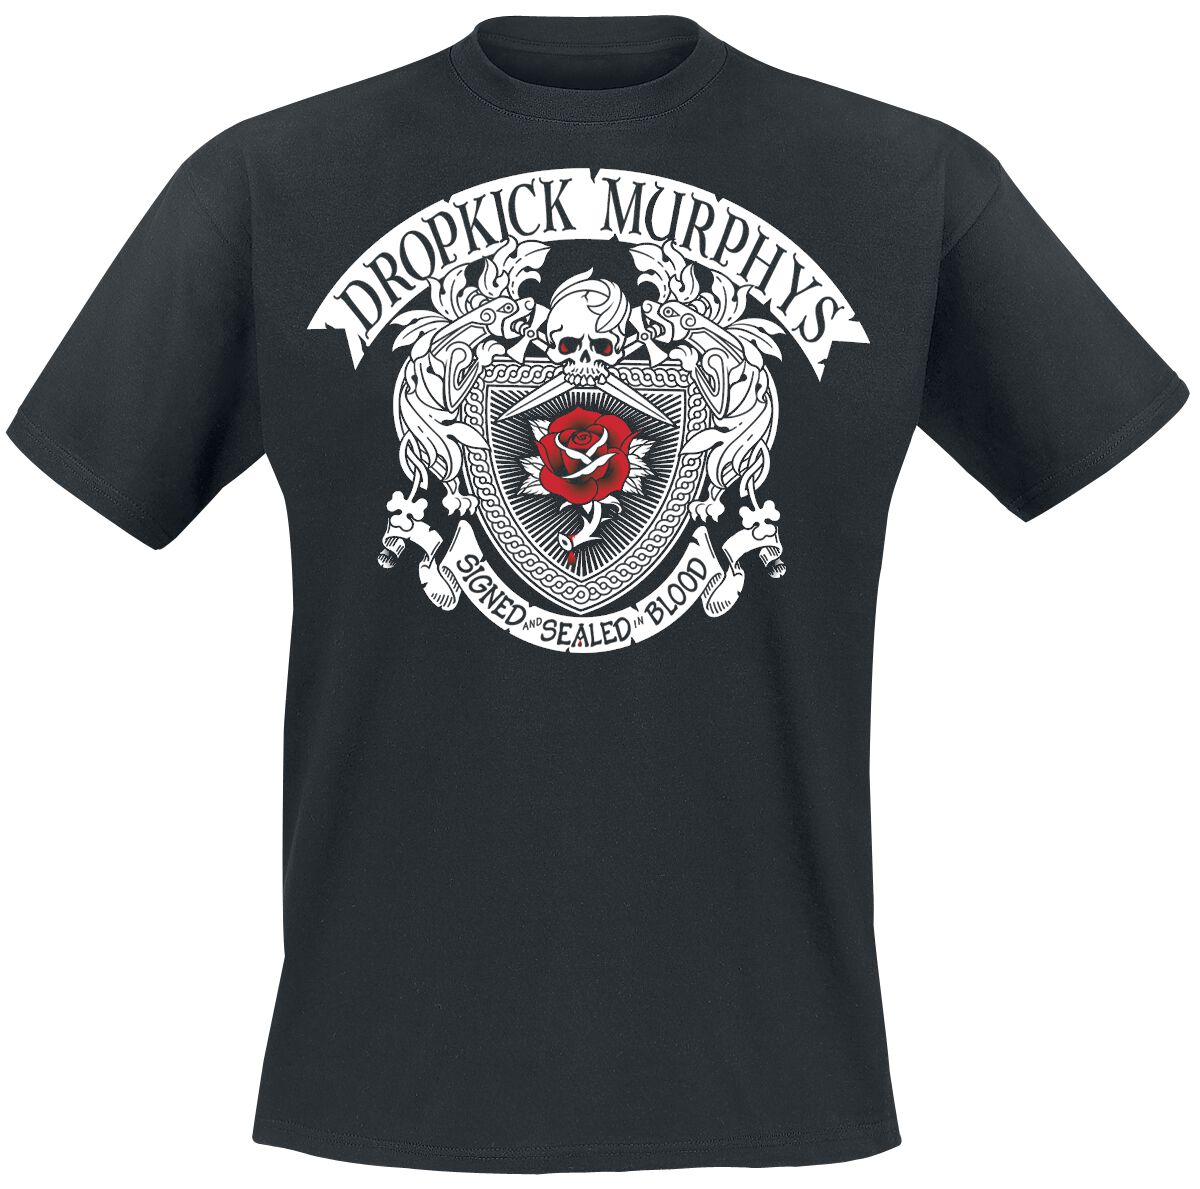 Image of Dropkick Murphys Signed and sealed in blood T-Shirt schwarz